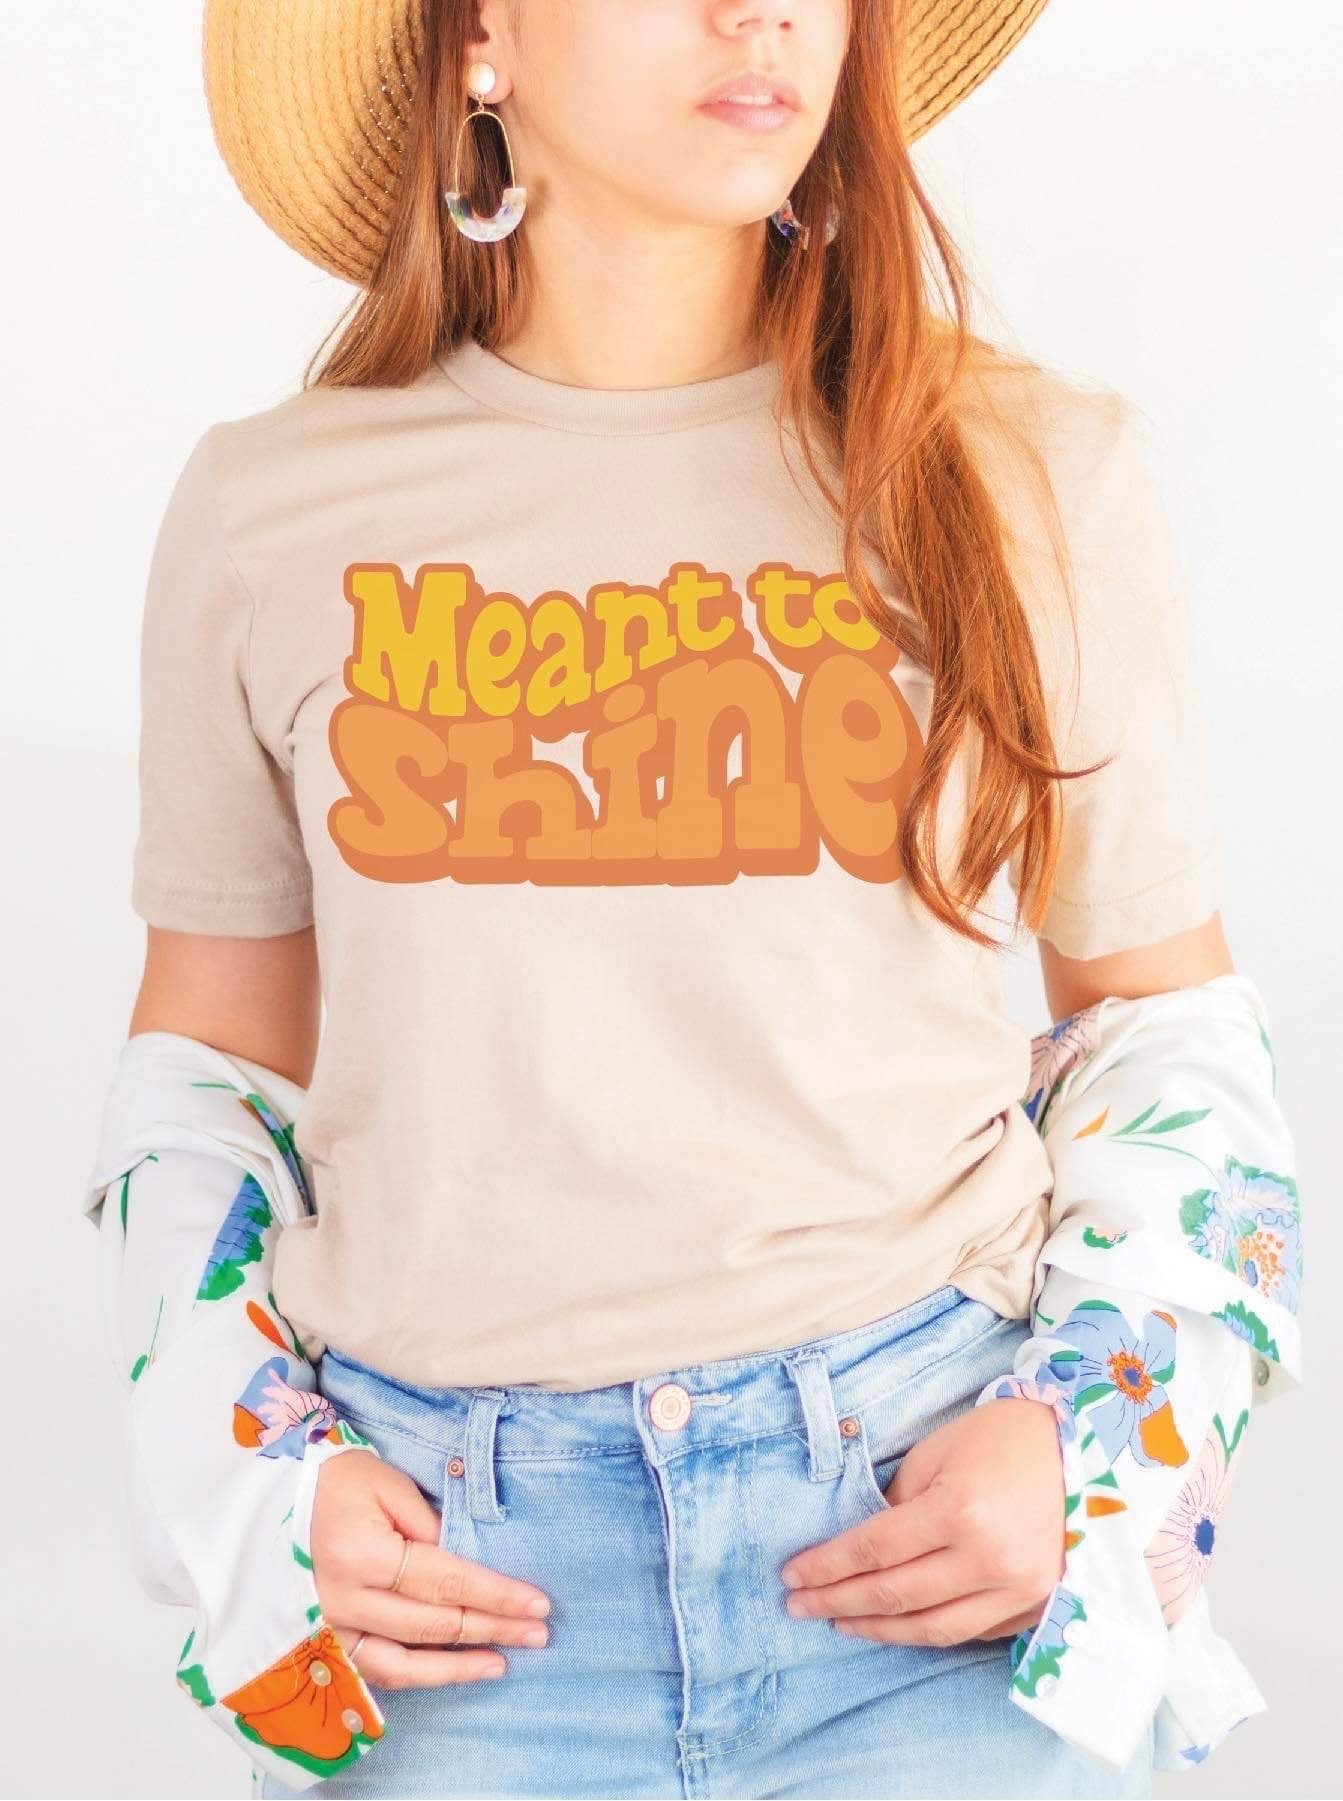 "Meant to Shine" Tee